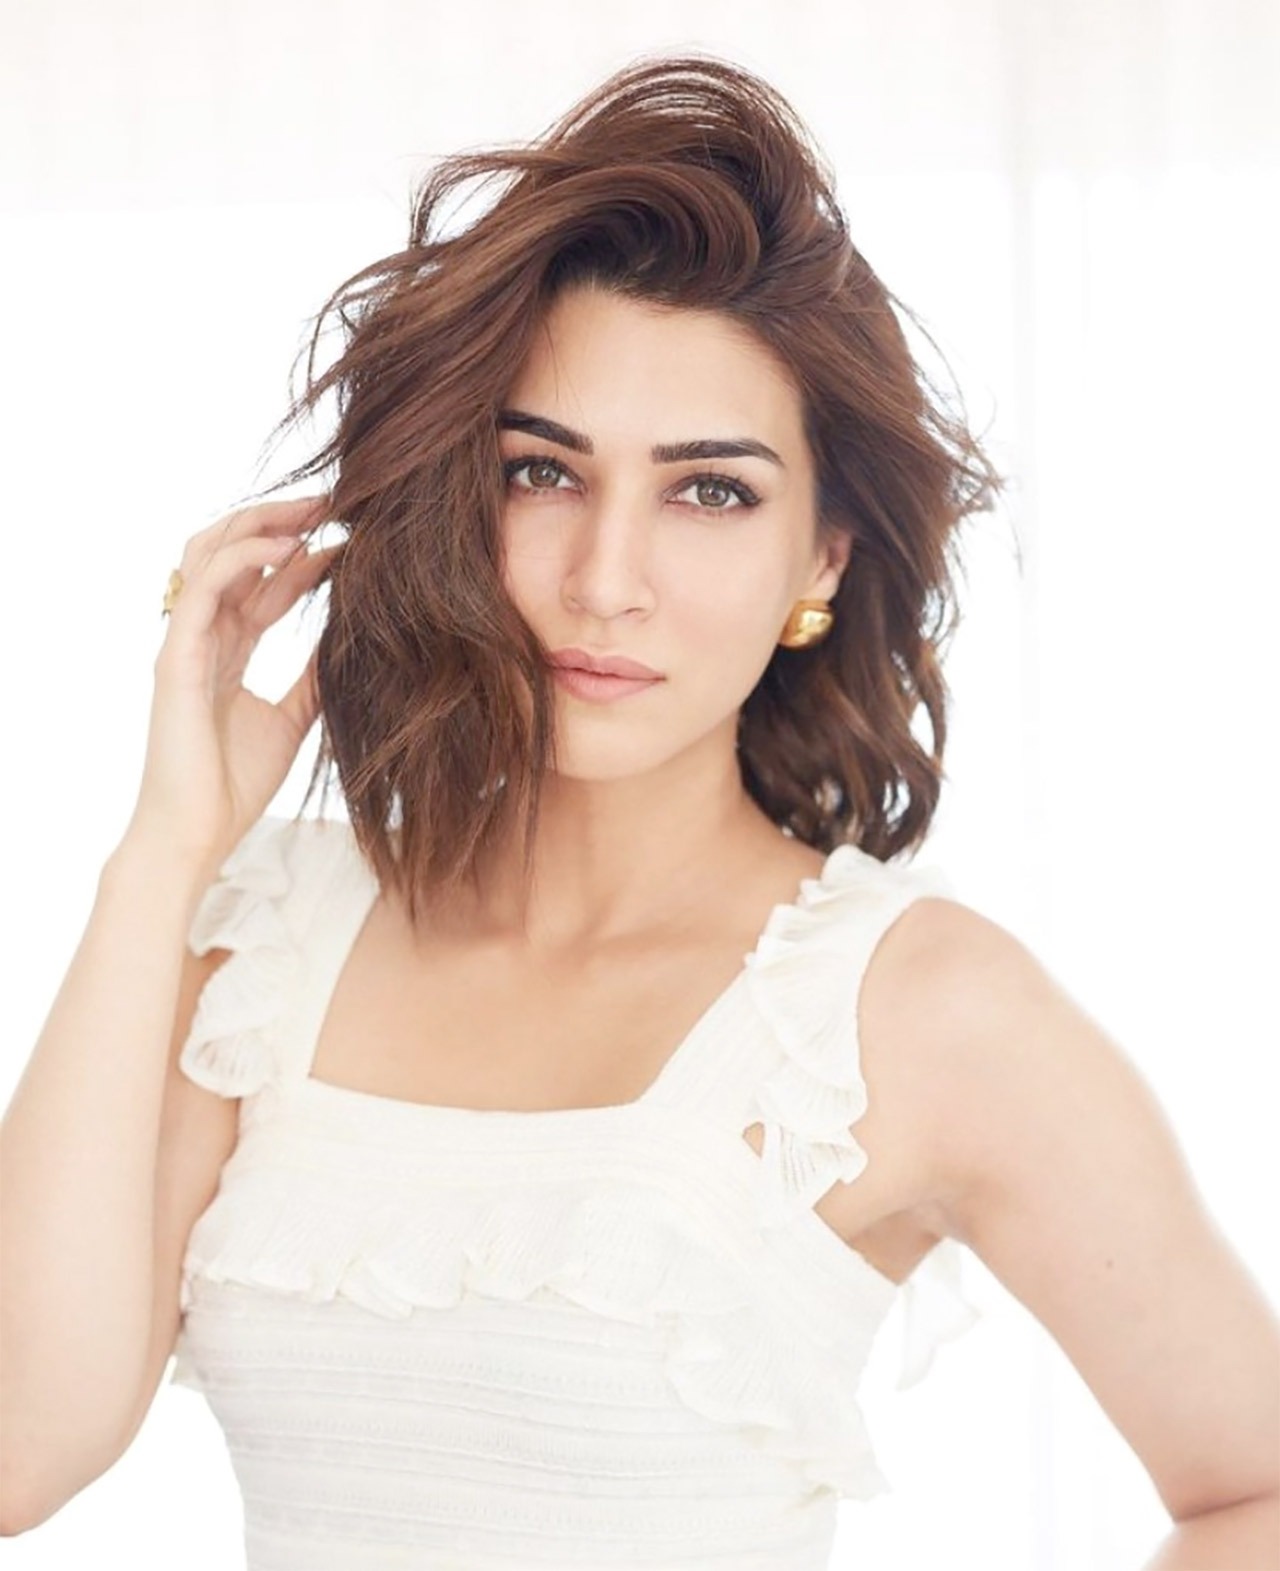 Kriti Sanon in a white frill midi dress worth Rs. 68,000 is radiating summer vibes